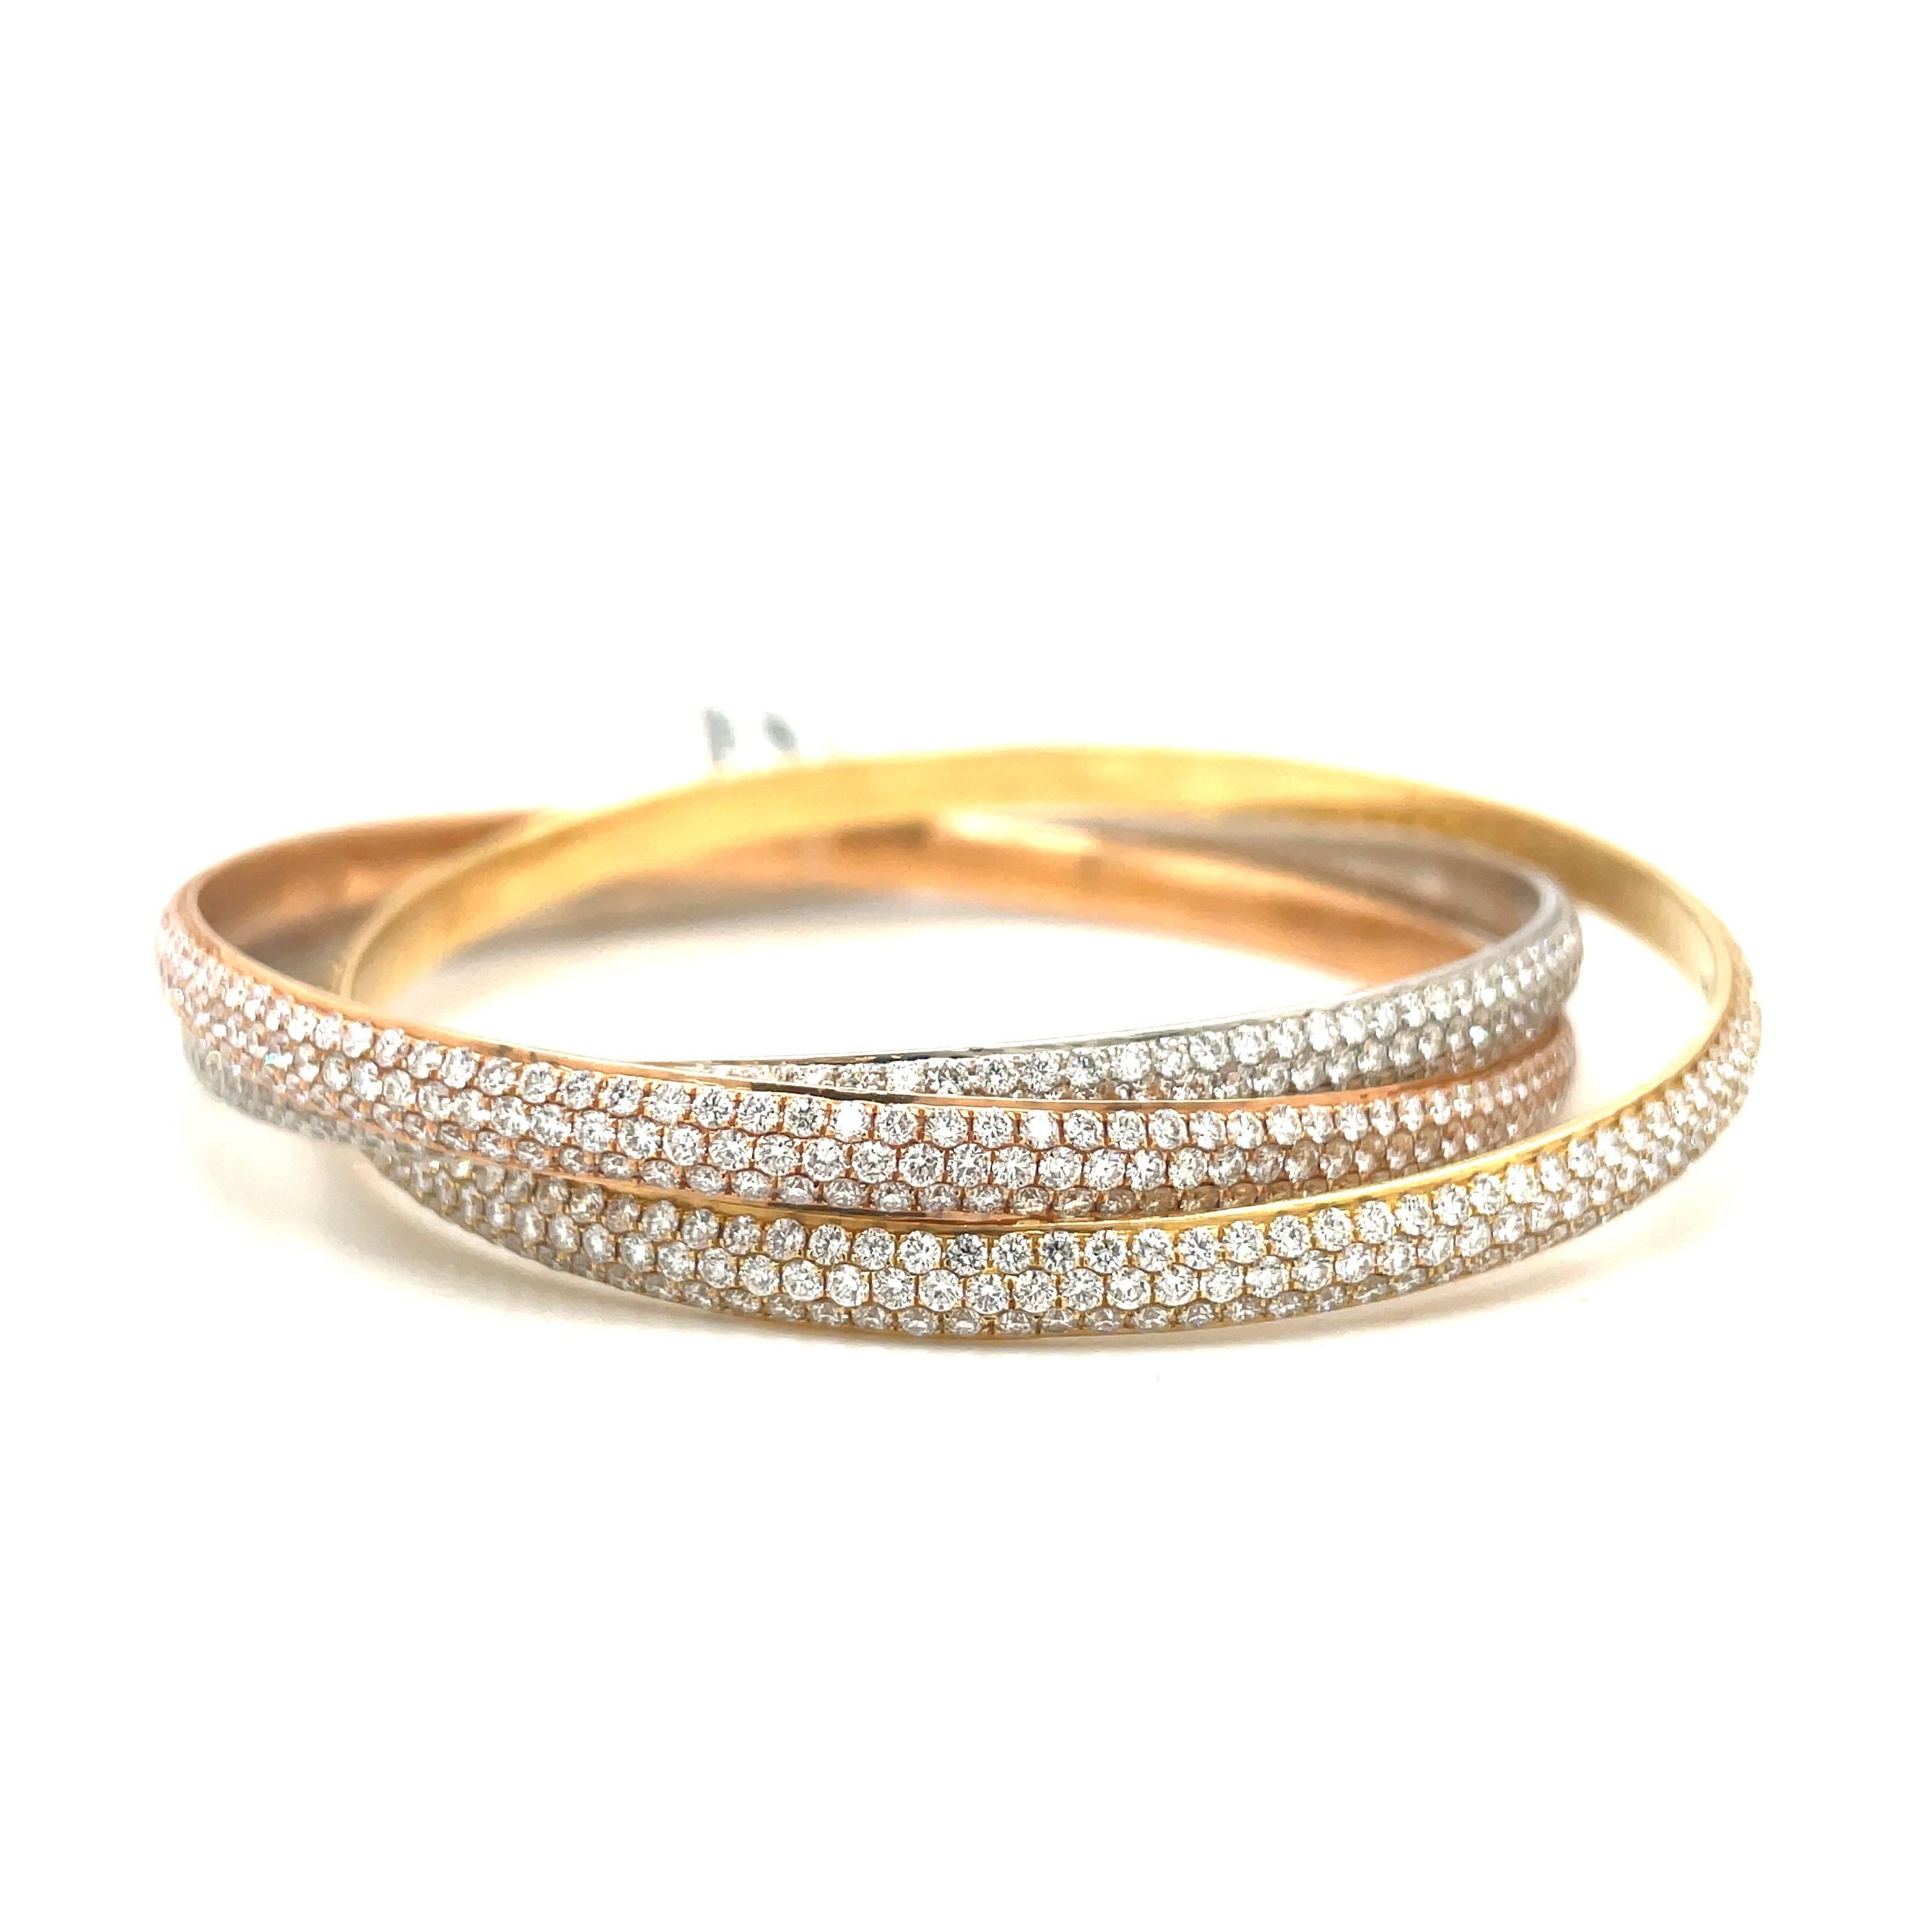 Designed in 18 karat yellow, rose and white gold, this rolling bangle bracelet remains classic. The bangle bracelet is set with 17.05 carats of round brilliant diamonds. Each bracelet has 3 rows of diamonds.
The inside measurement is 2.5 